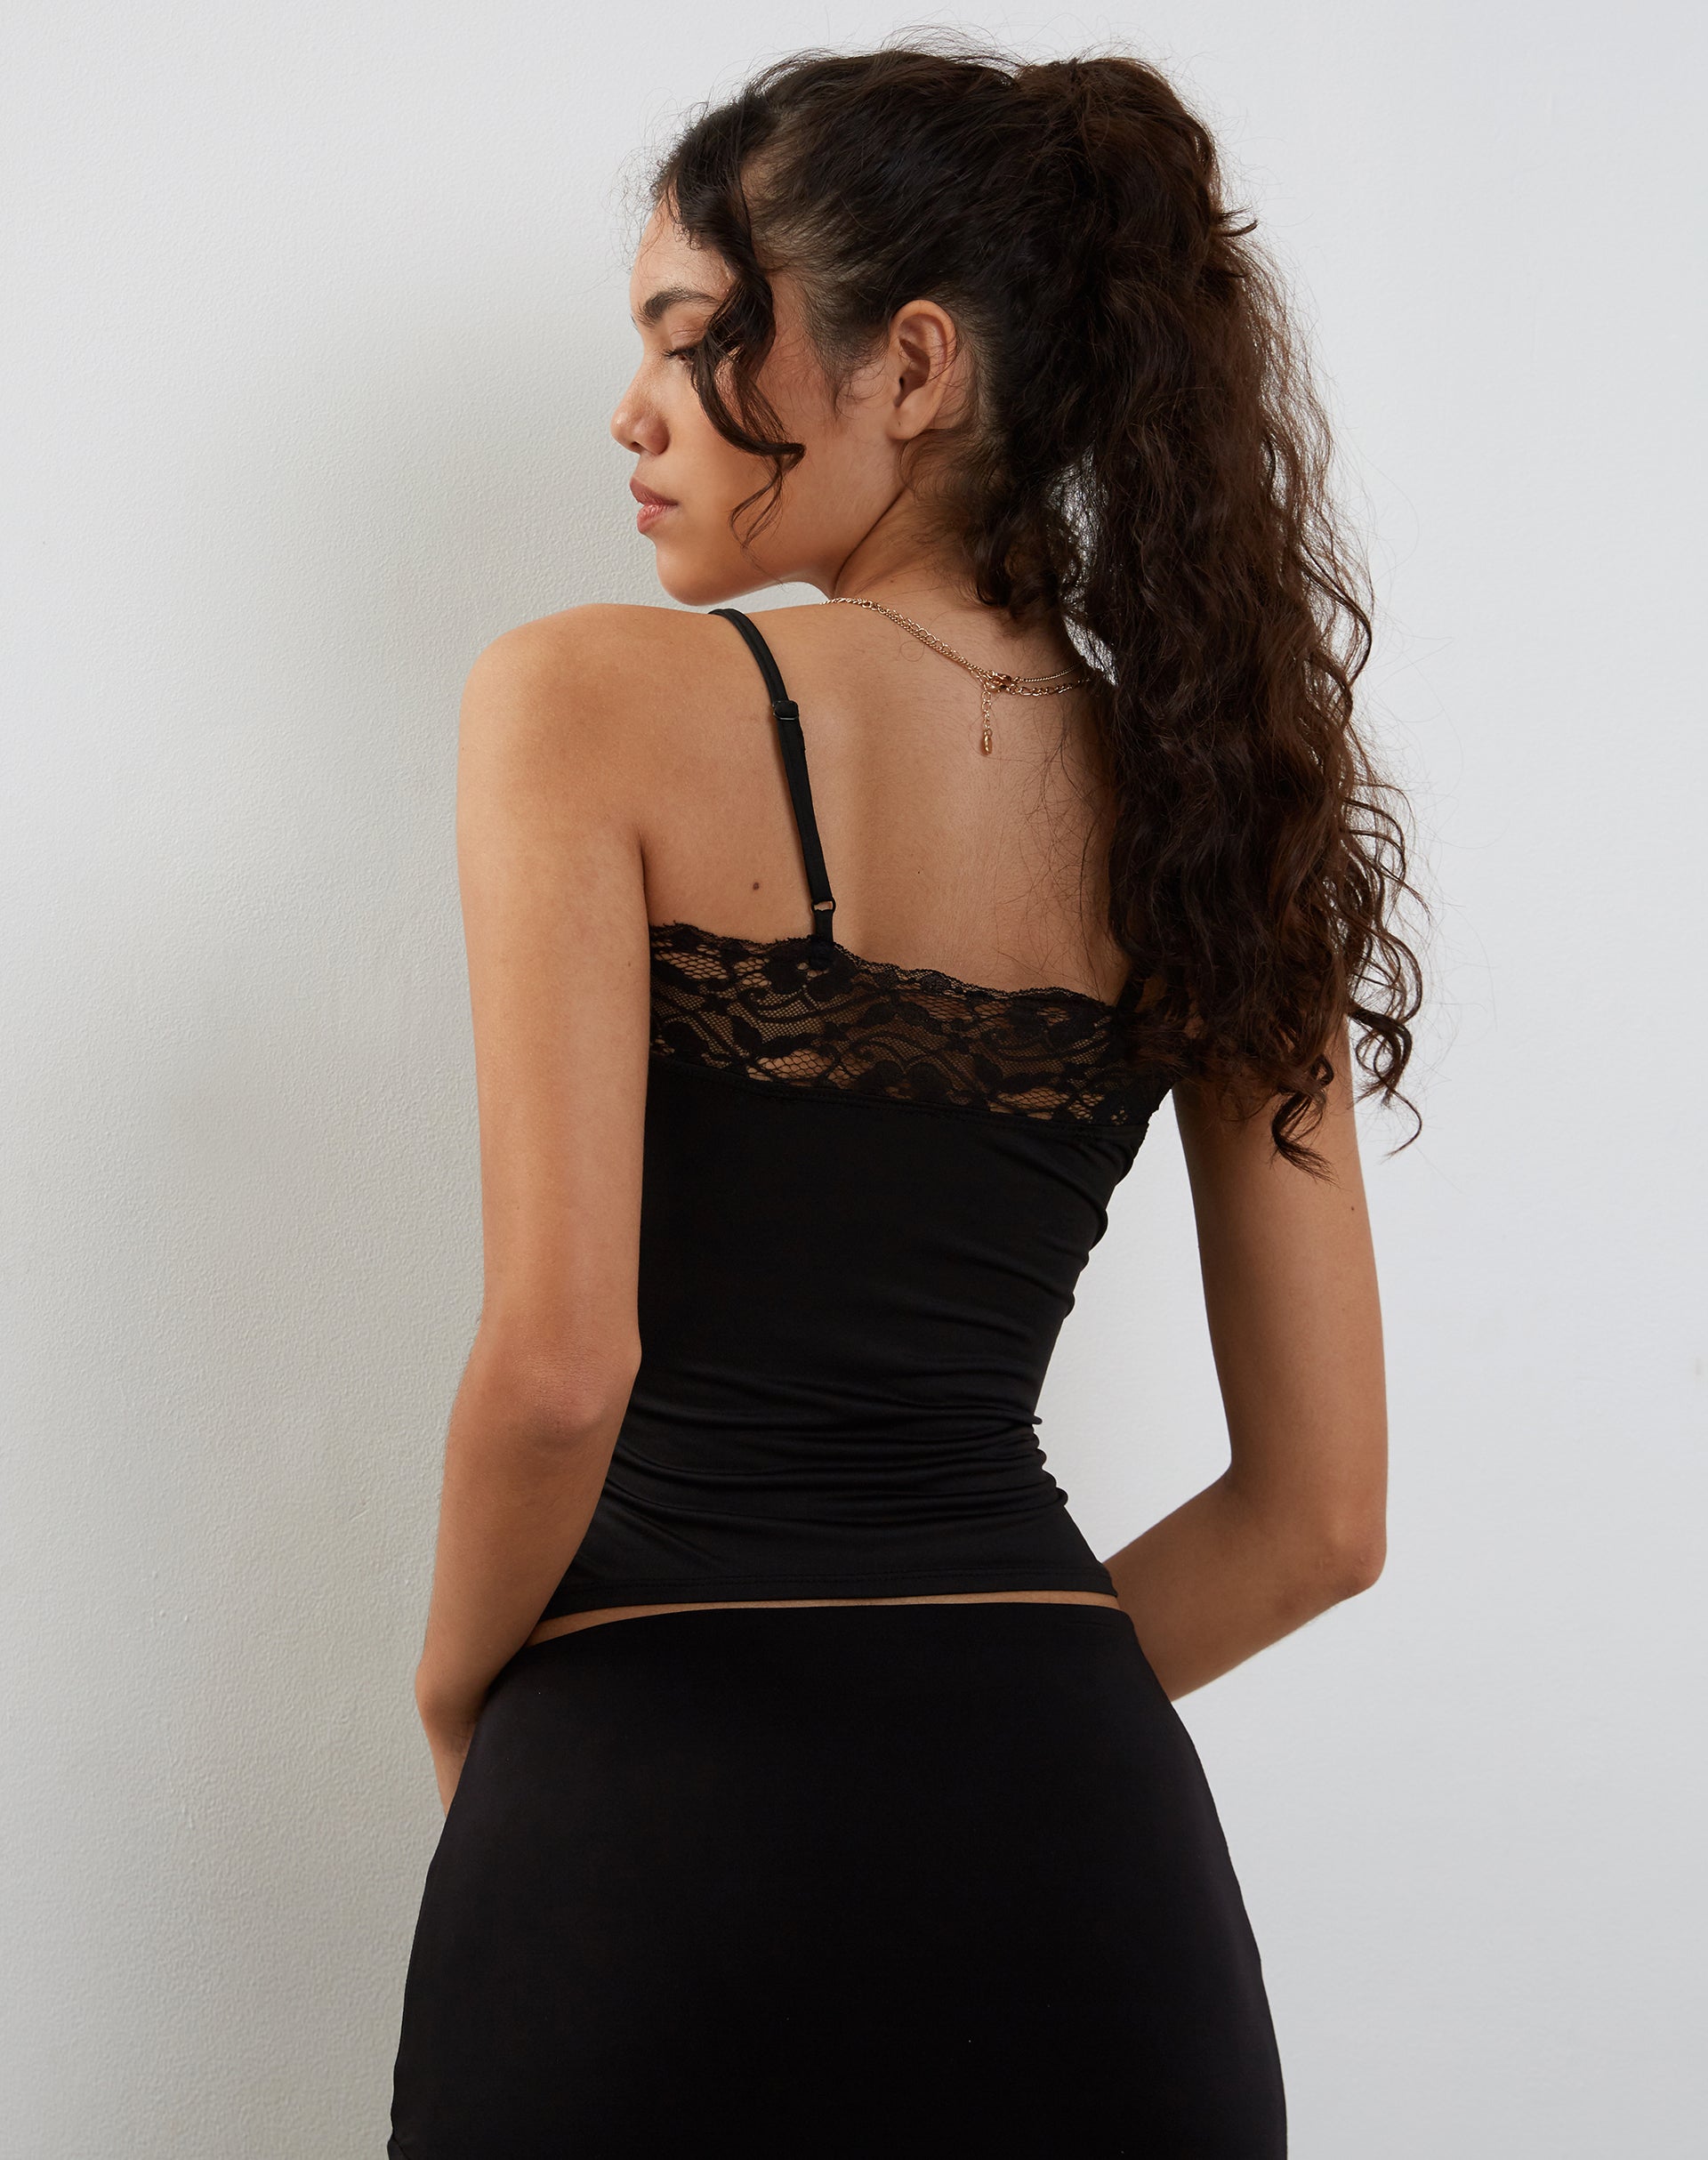 Image of Tucci Vest Top in Slinky Lace Black